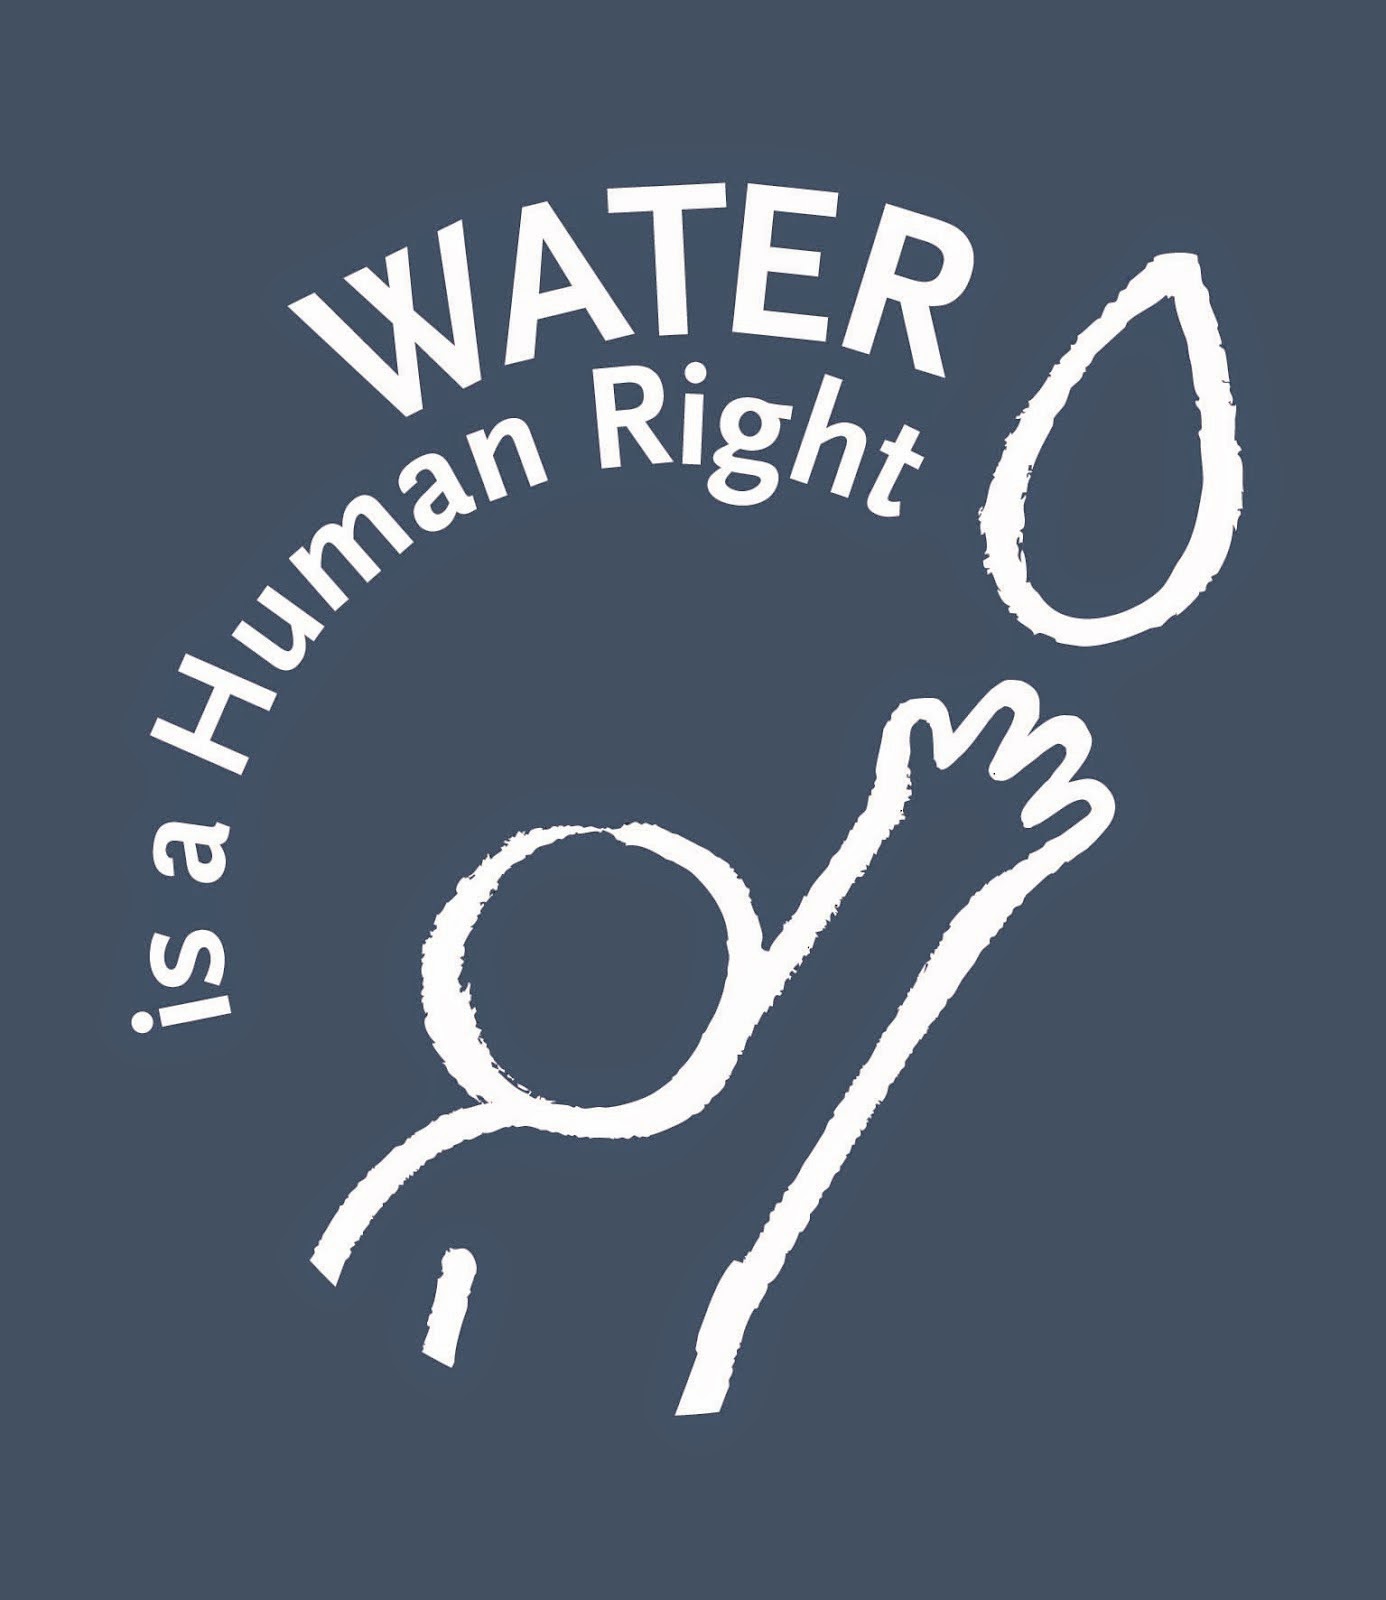 Water Is A Human Right!